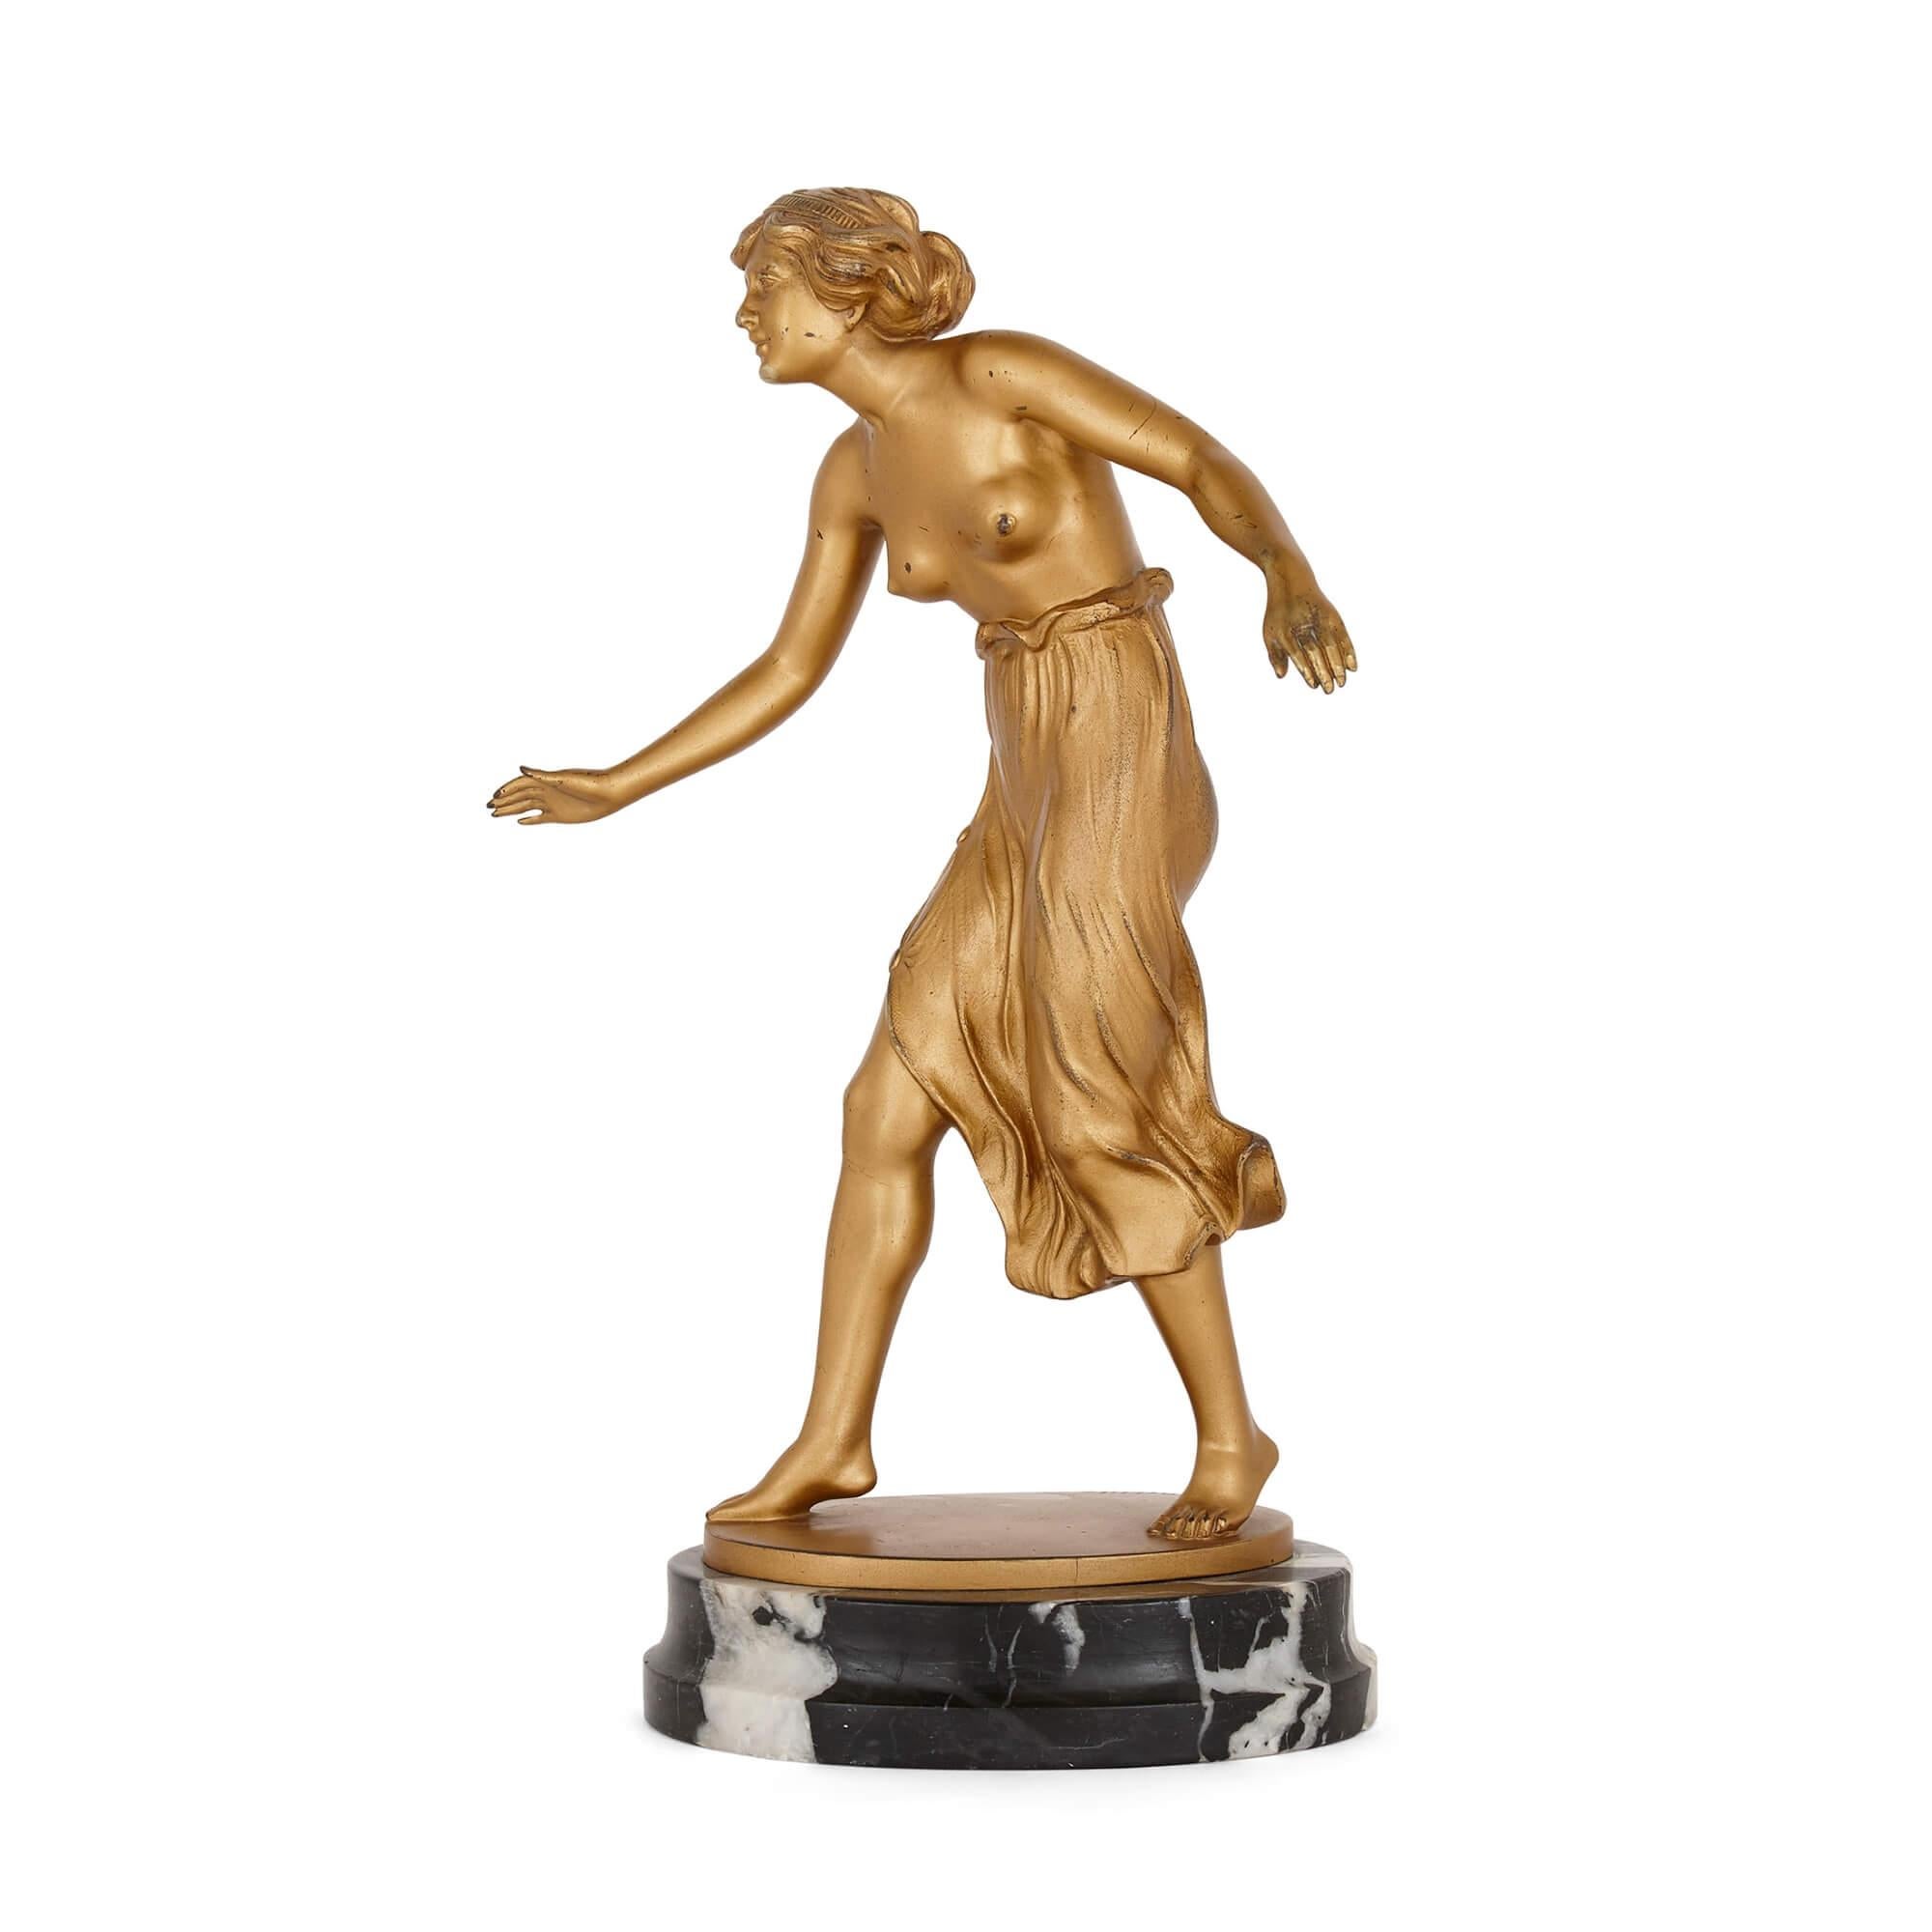 Art Deco gilt bronze sculpture of a woman by Rochlitz
Continental, c. 1920
Measures: Height 30.5cm, width 16cm, depth 13cm

This fine gilt bronze sculpture is demonstrative of the elegance and grace of Art Deco design. The sculpture depicts a